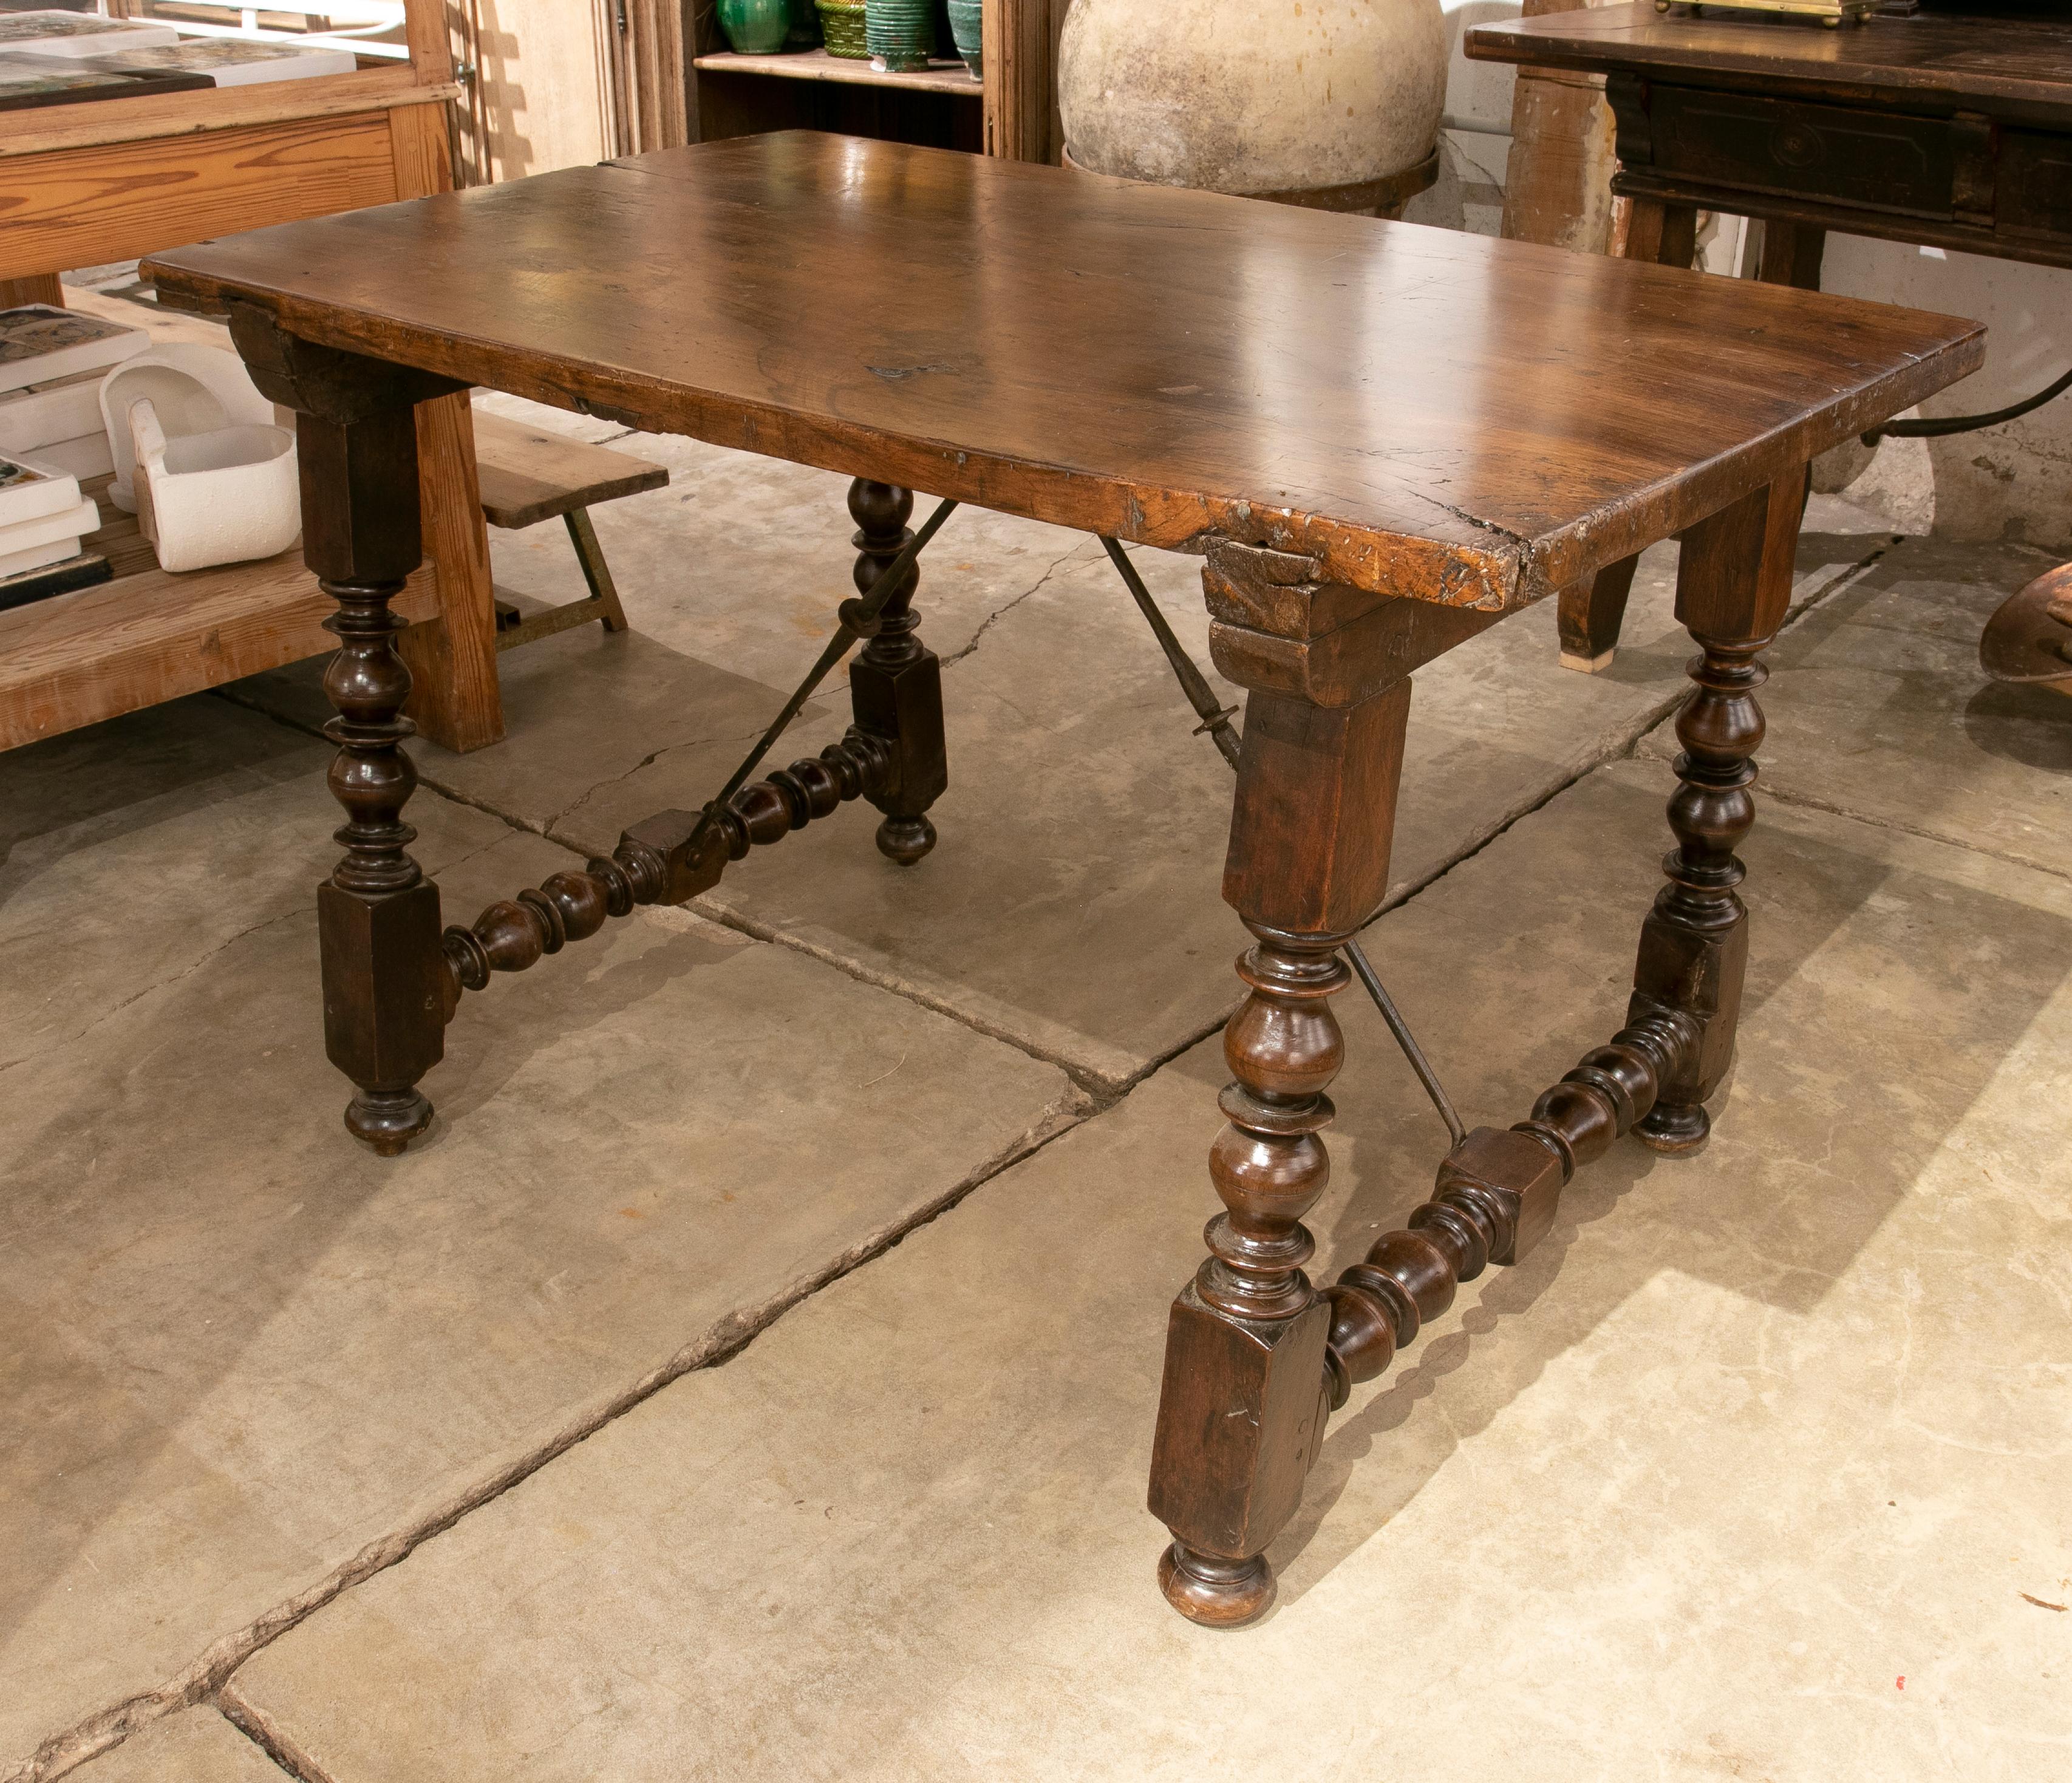 18th century Spanish walnut table with turned legs